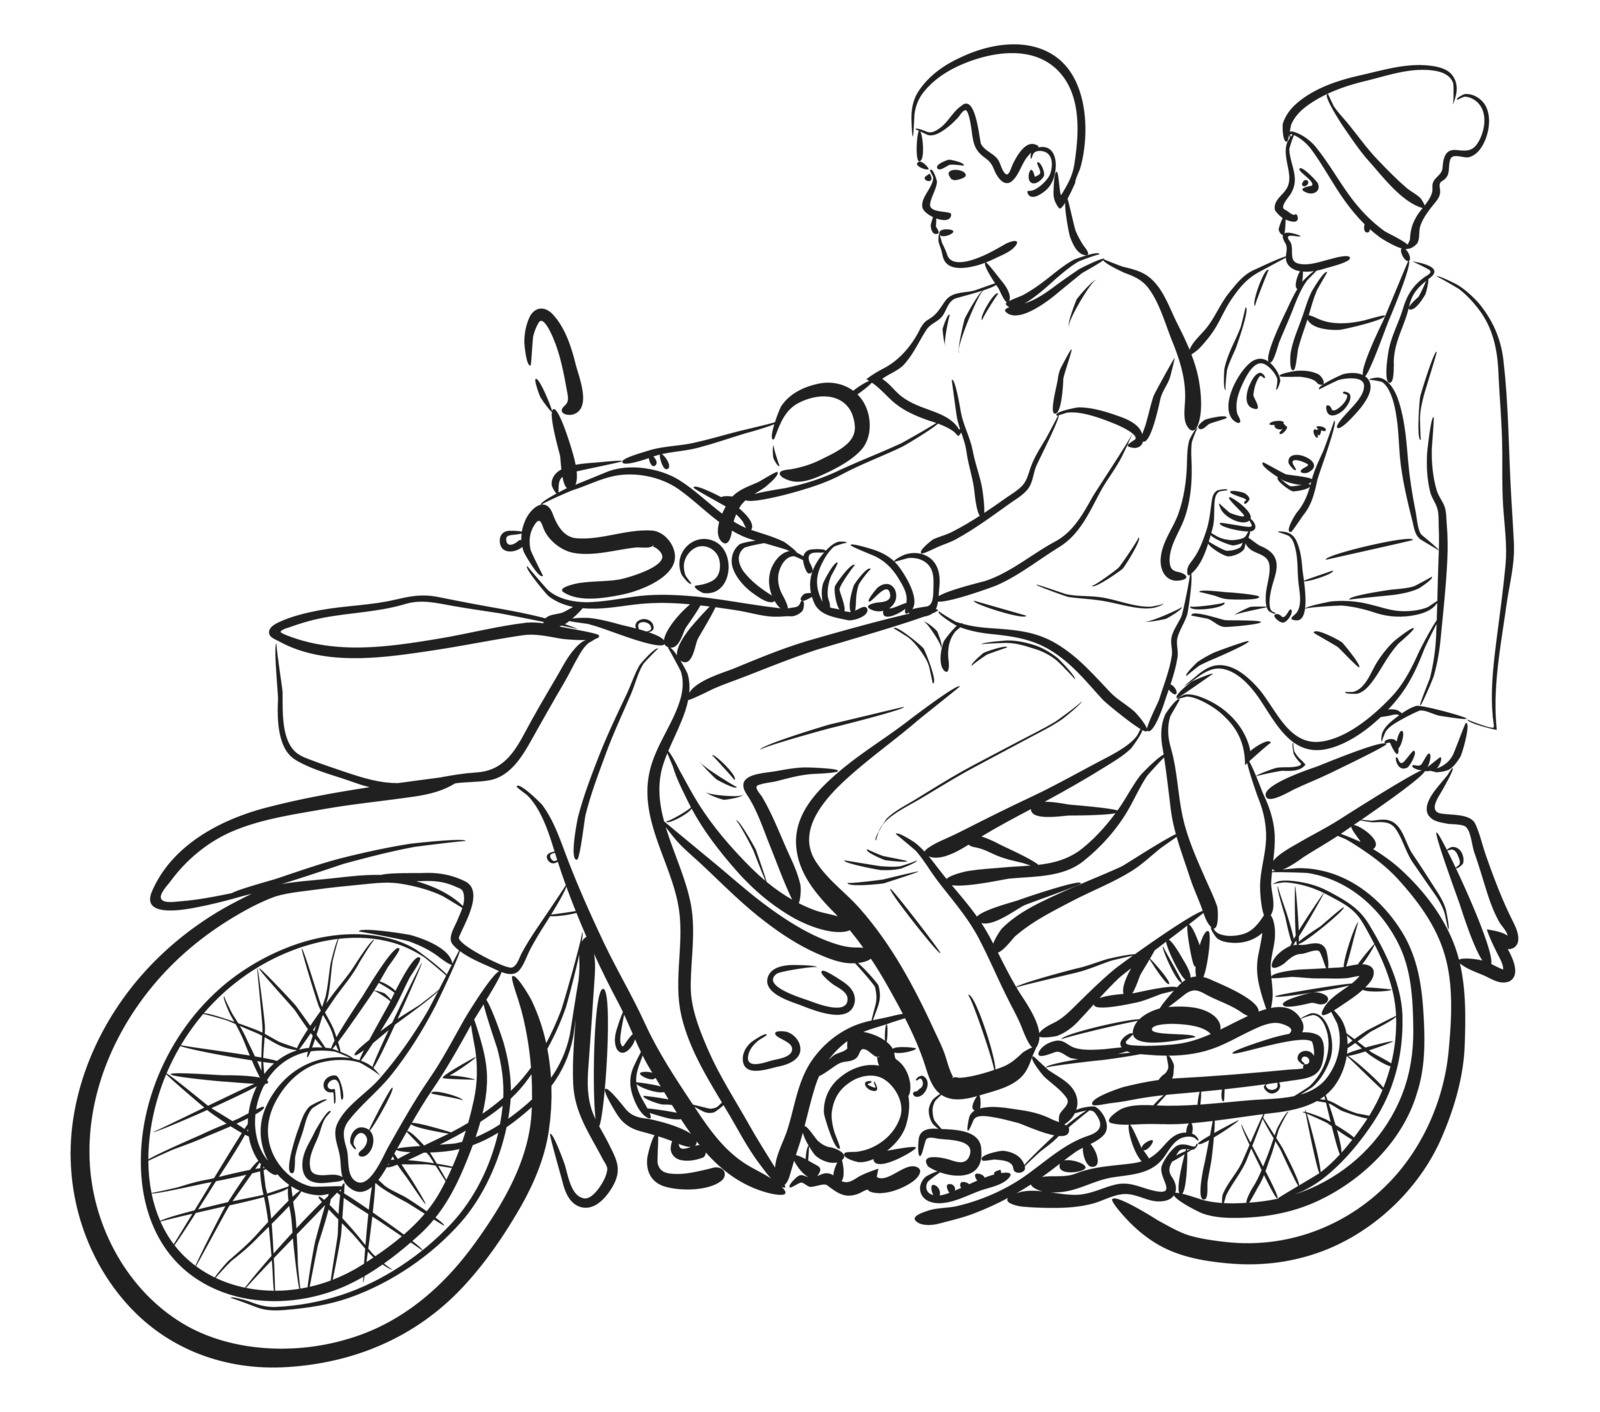 Editable vector sketch of two people and a puppy on a motorcycle